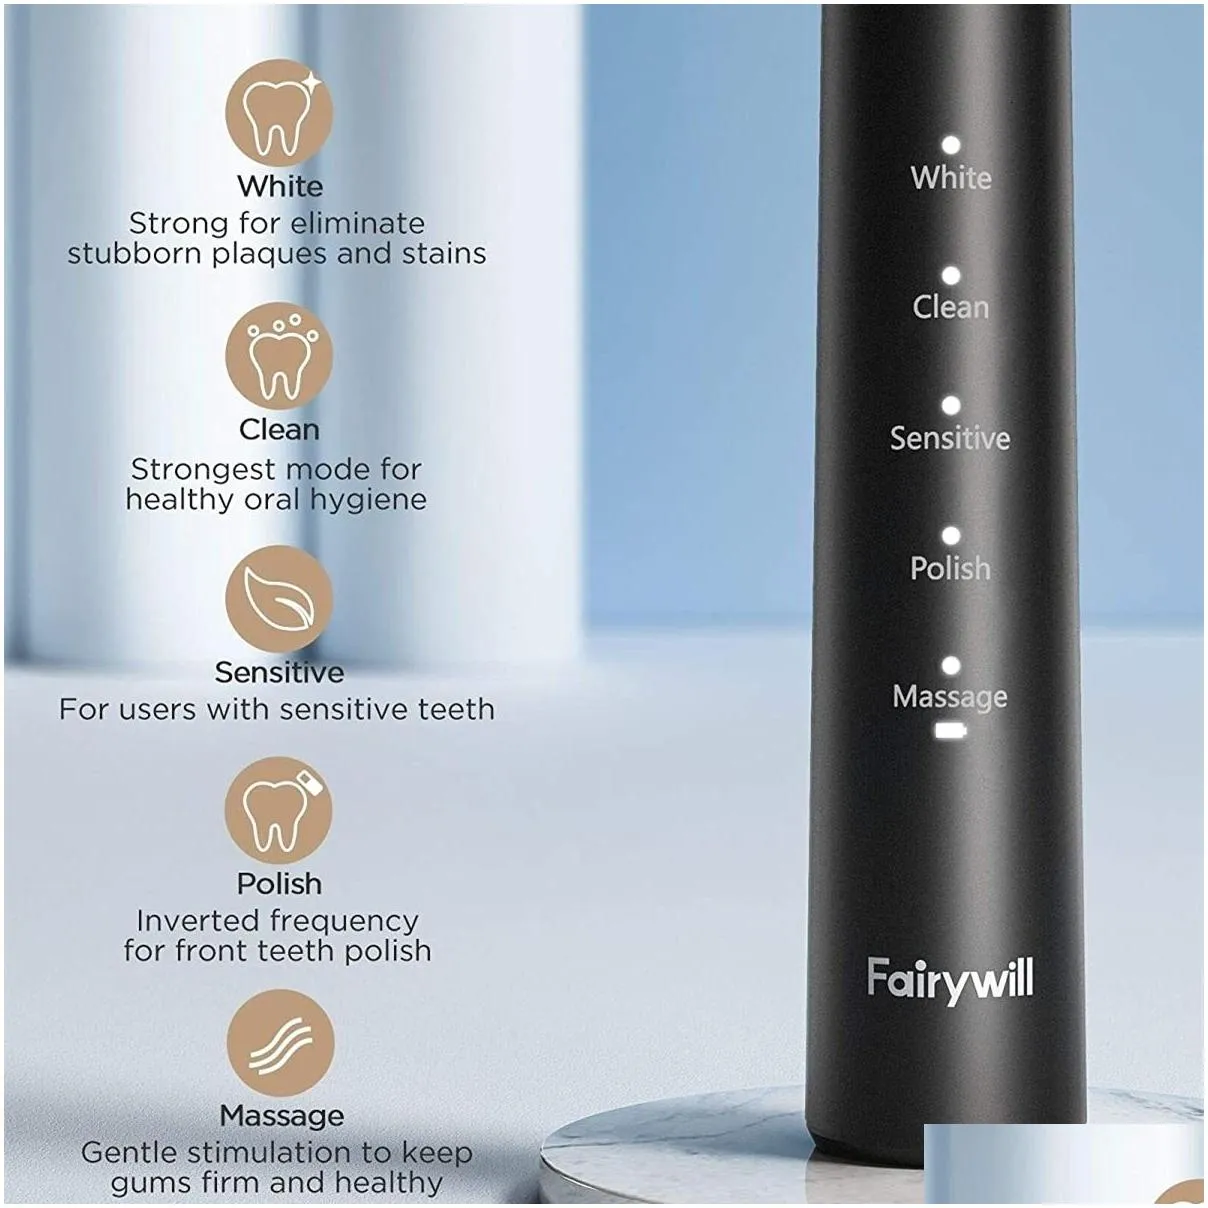 Toothbrush Fairywill Sonic Electric Toothbrush E11 Waterproof USB Charge Rechargeable Electric Toothbrush 8 Brush Replacement Heads Adult